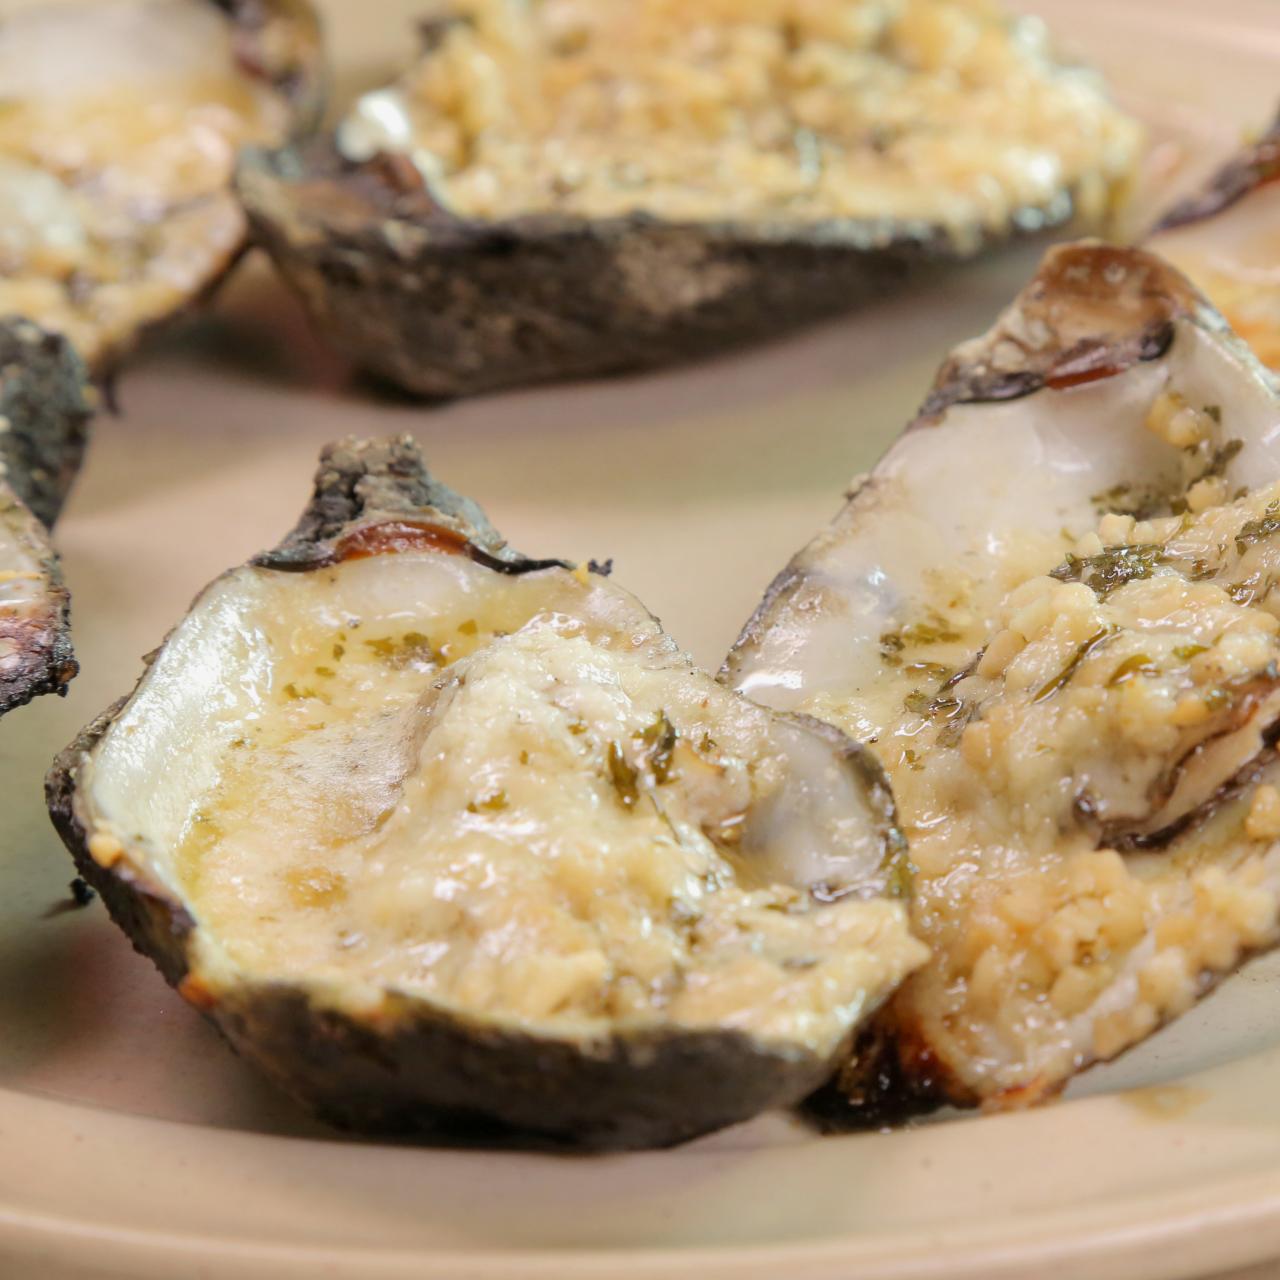 https://food.fnr.sndimg.com/content/dam/images/food/fullset/2018/12/20/0/DVSP82_Chargrilled-Oysters_s4x3.jpg.rend.hgtvcom.1280.1280.suffix/1545325051689.jpeg